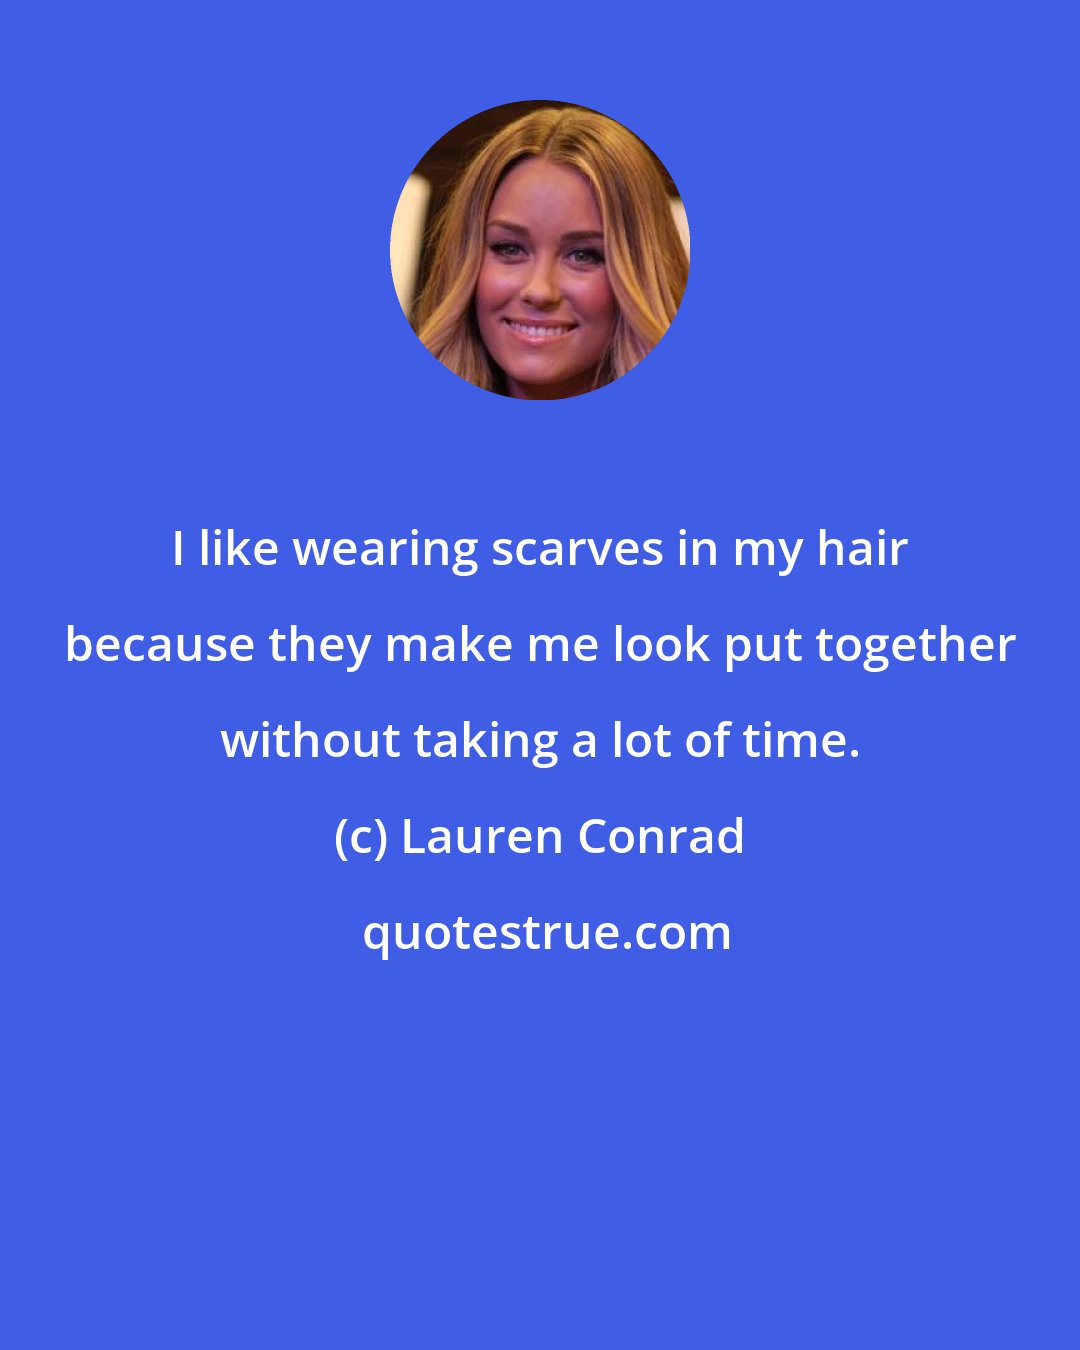 Lauren Conrad: I like wearing scarves in my hair because they make me look put together without taking a lot of time.